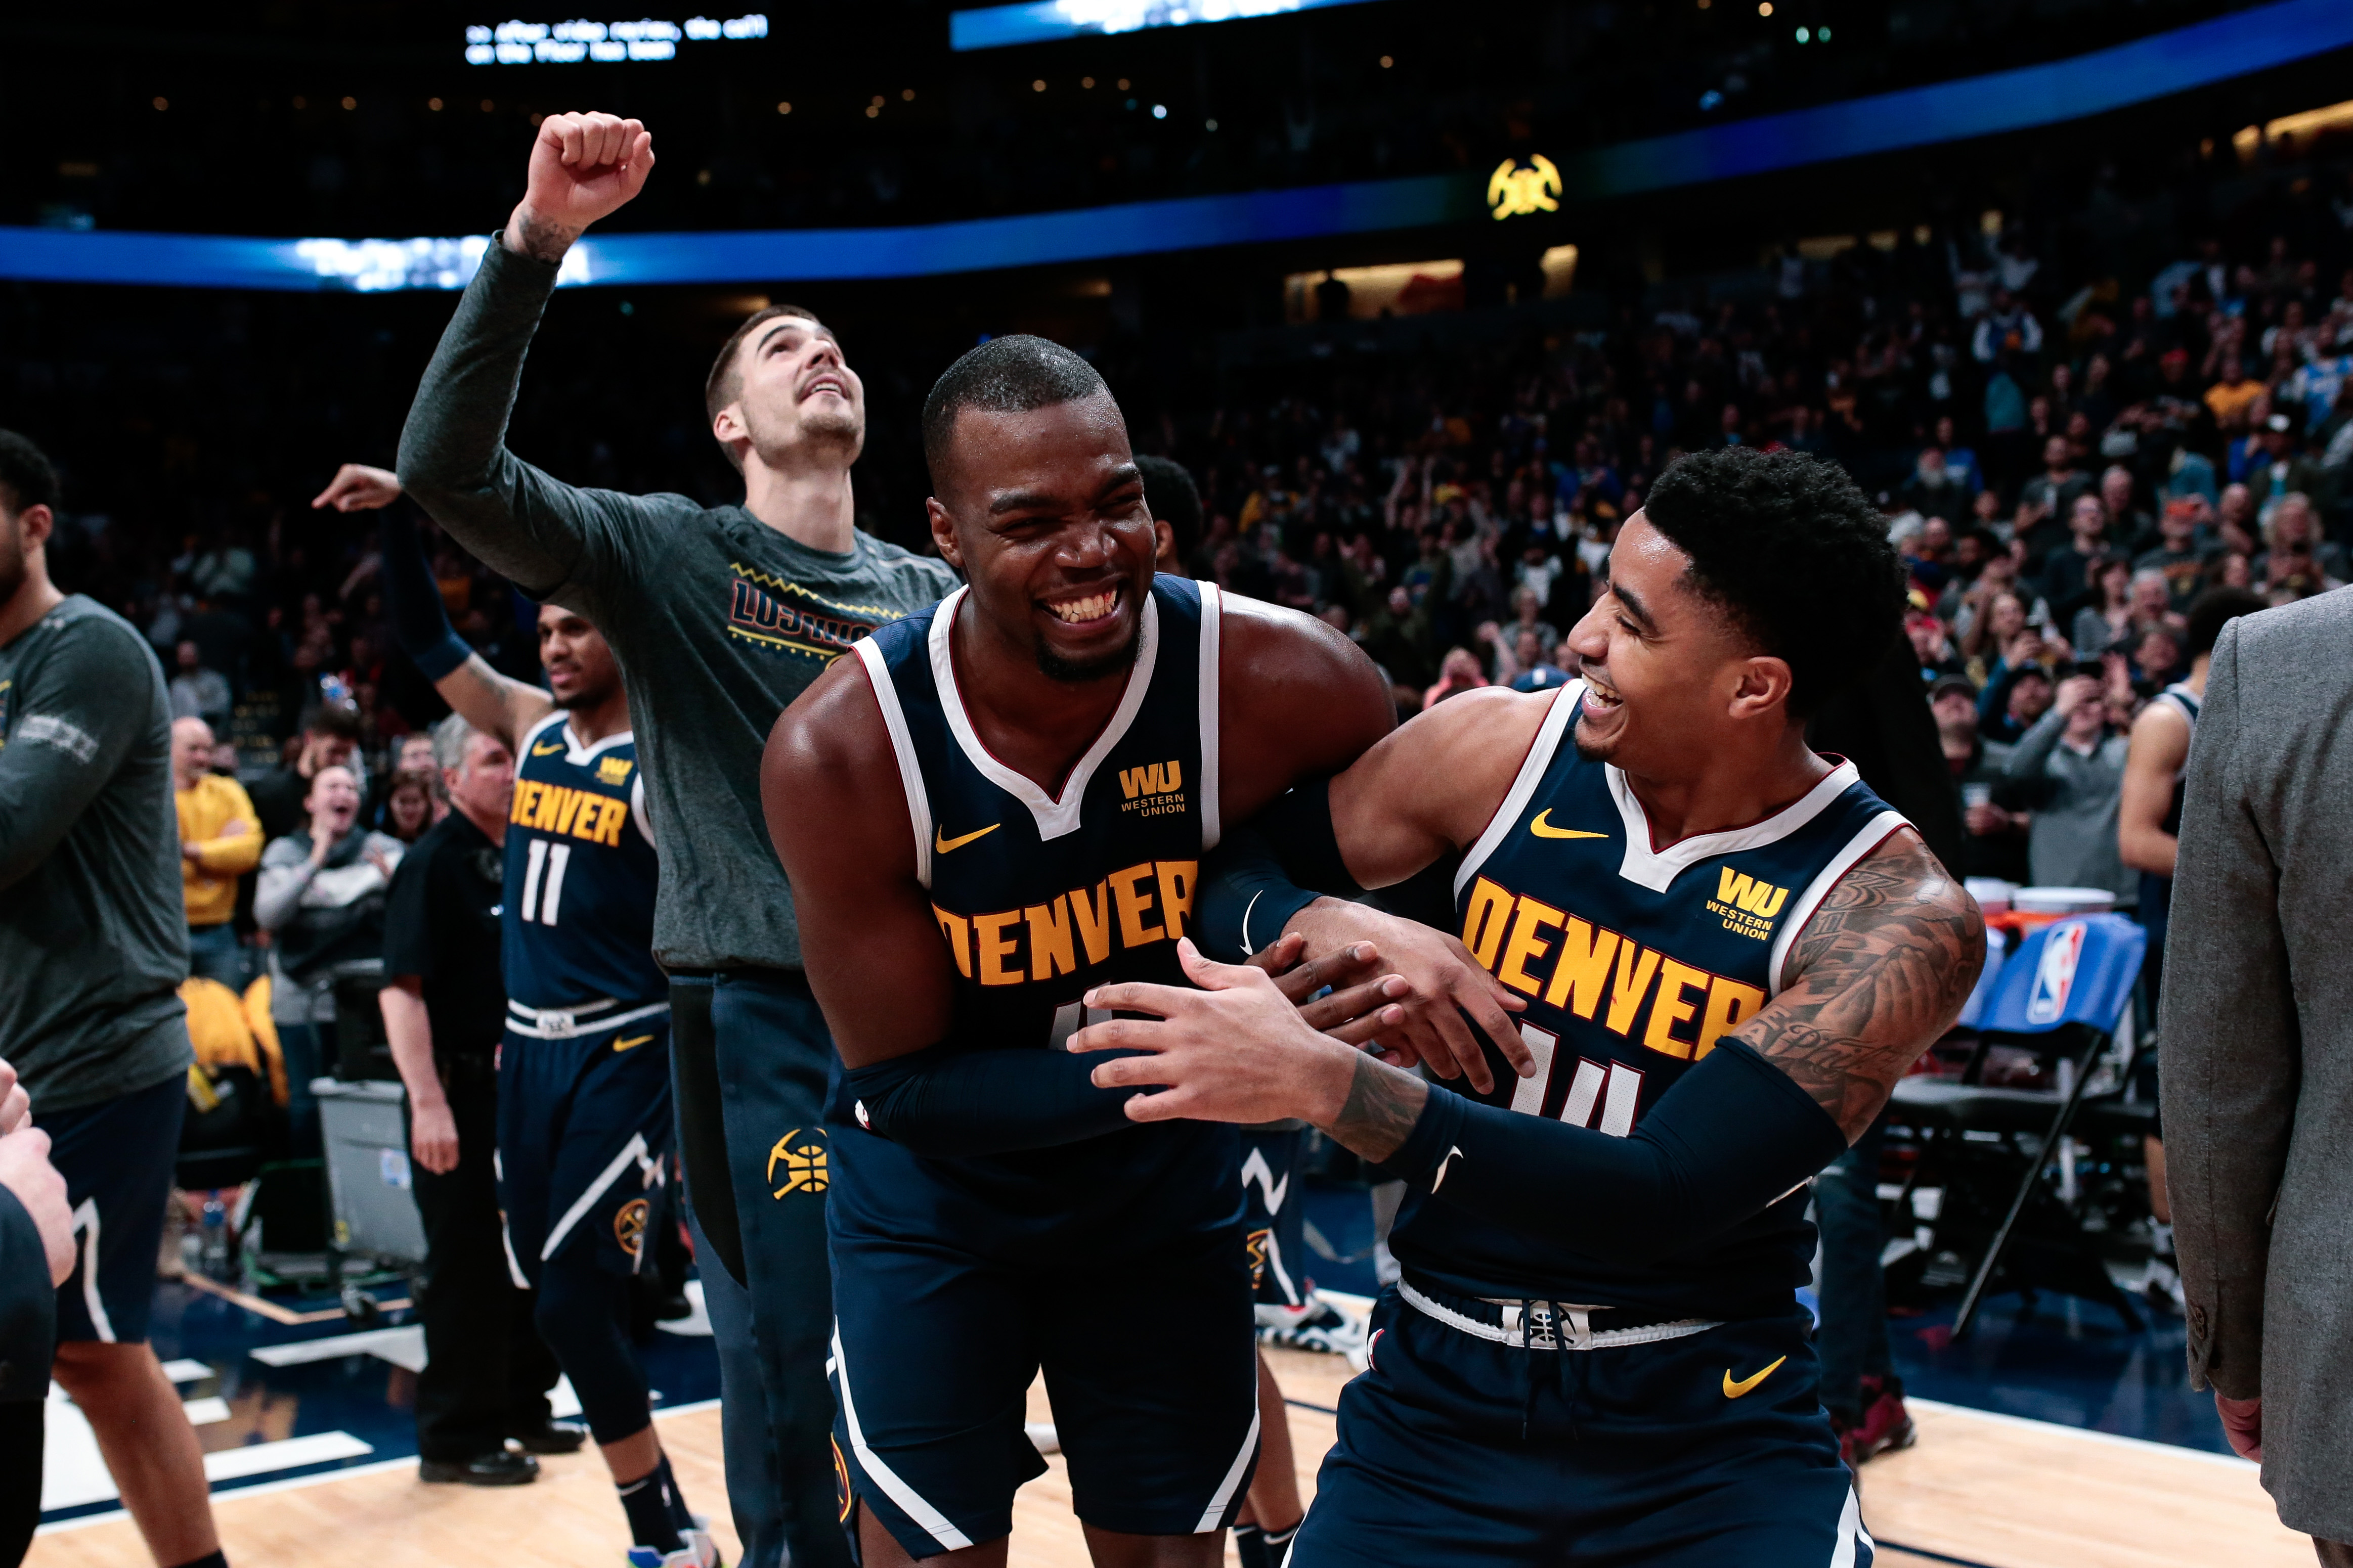 Denver Nuggets forward Paul Millsap (4) and guard Gary Harris (14) react after the game against the Dallas Mavericks at the Pepsi Center.